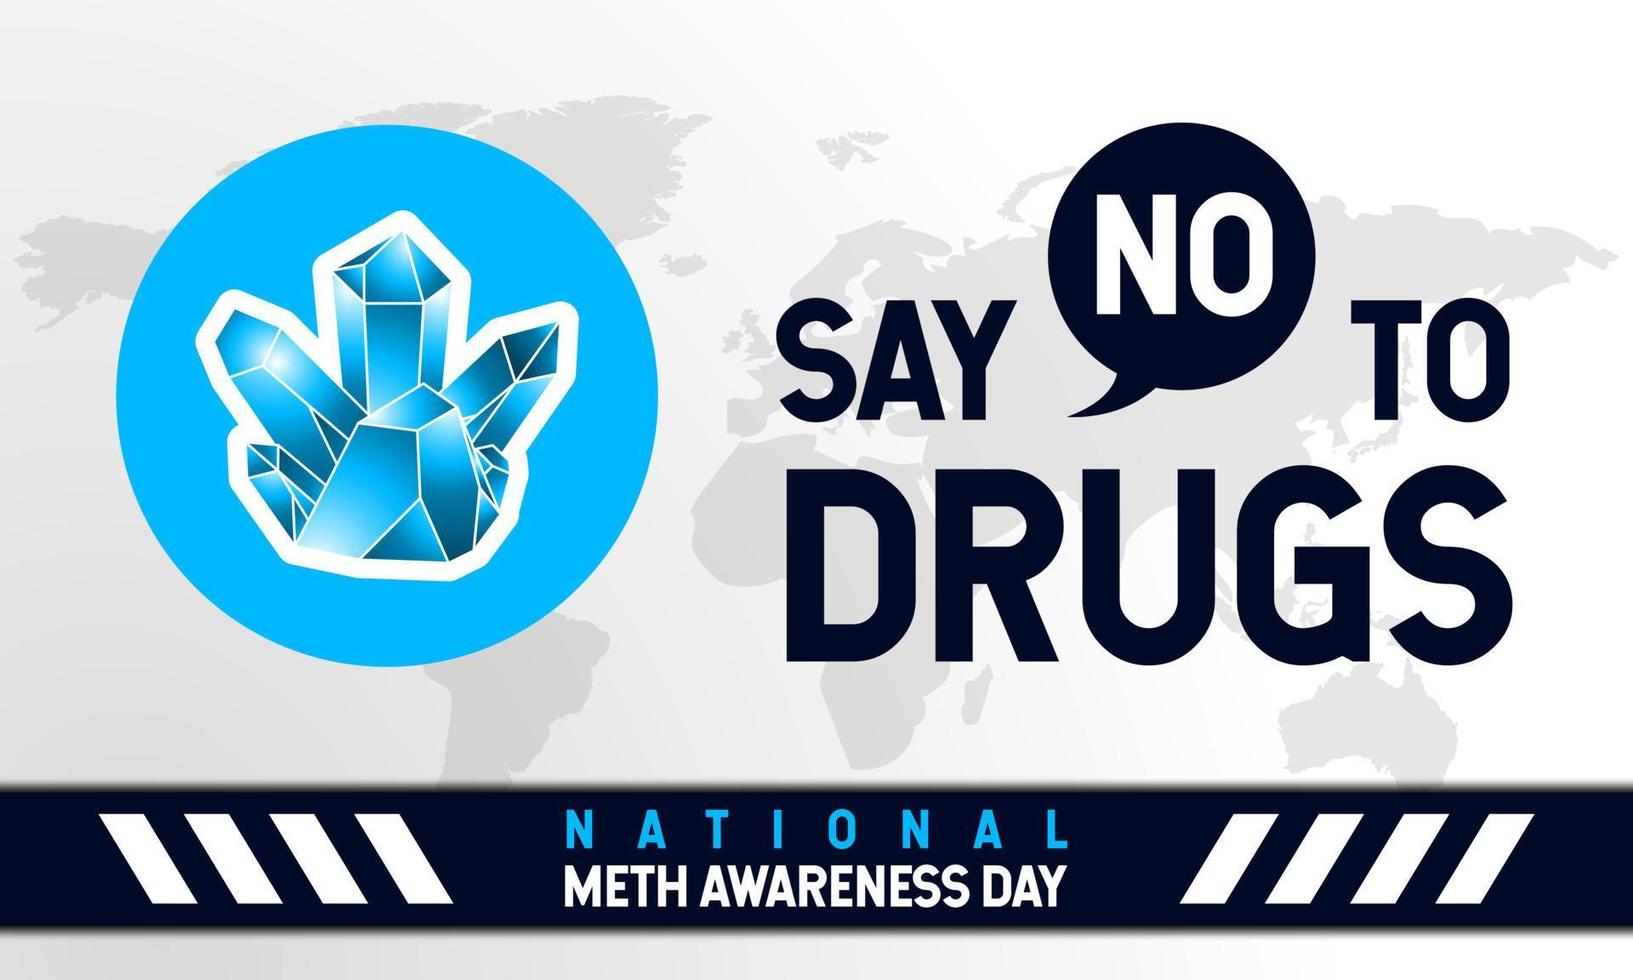 National Meth Awareness Day Background. November 30. Template for banner, greeting card, or poster. With a blue crystal amphetamine icon. Premium vector illustration